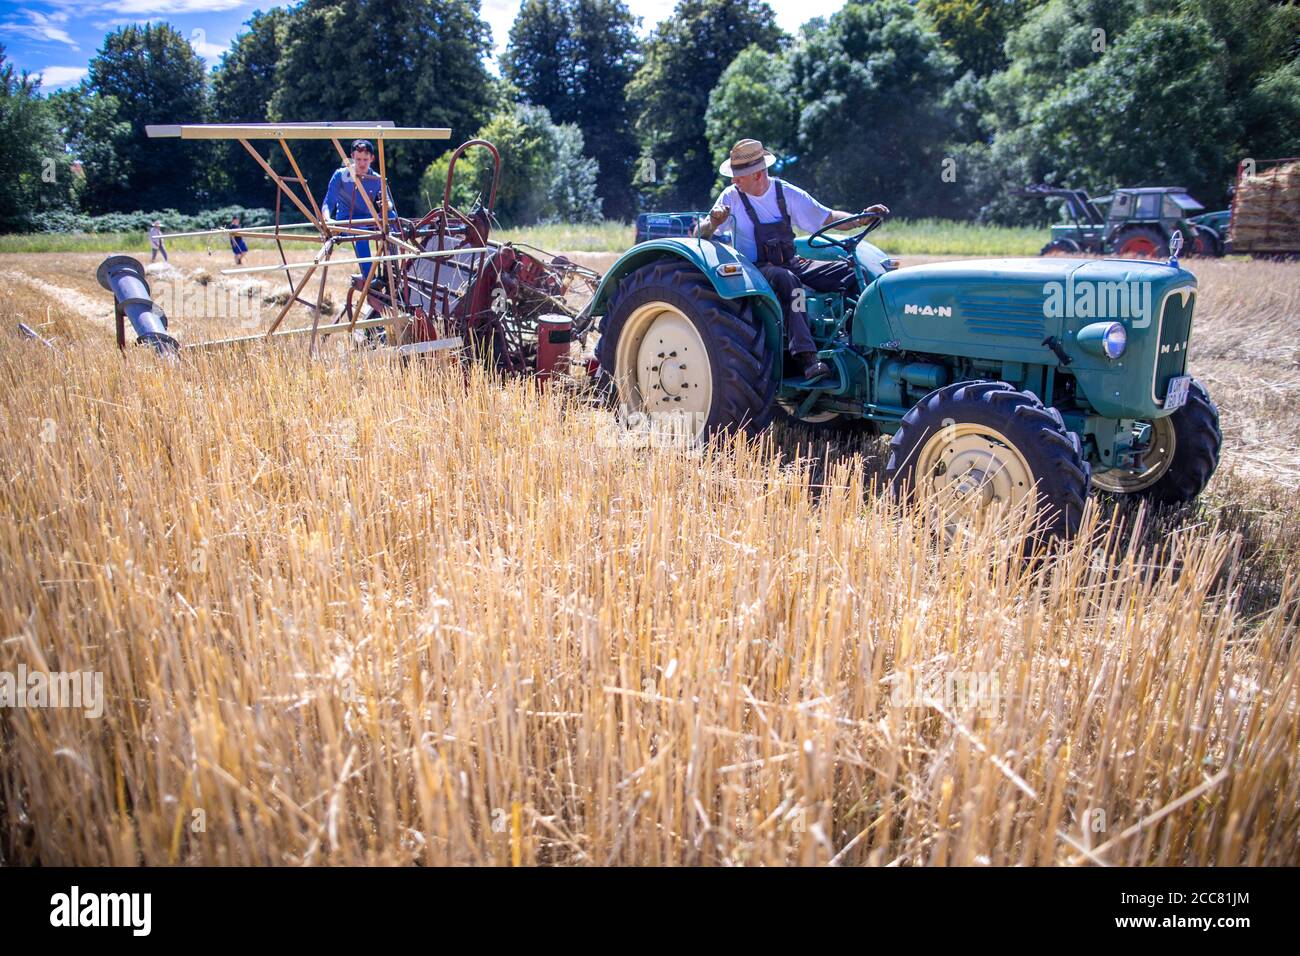 01 August 2020, Schleswig-Holstein, Lübeck: A historic swath mower is used to mow and bind yarrows of straw when harvesting rye straw for the production of drinking straws in the field near Lübeck. From July 2021 at the latest, plastic drinking straws may no longer be sold throughout the EU. As an alternative to the colourful drinking straws made of plastic, special rye is harvested on an area of two hectares near Lübeck and drinking straws are made from it. For many years Strohmi GmbH has been supplying these sustainable straws to hotels, upscale bars and restaurants as well as private indivi Stock Photo